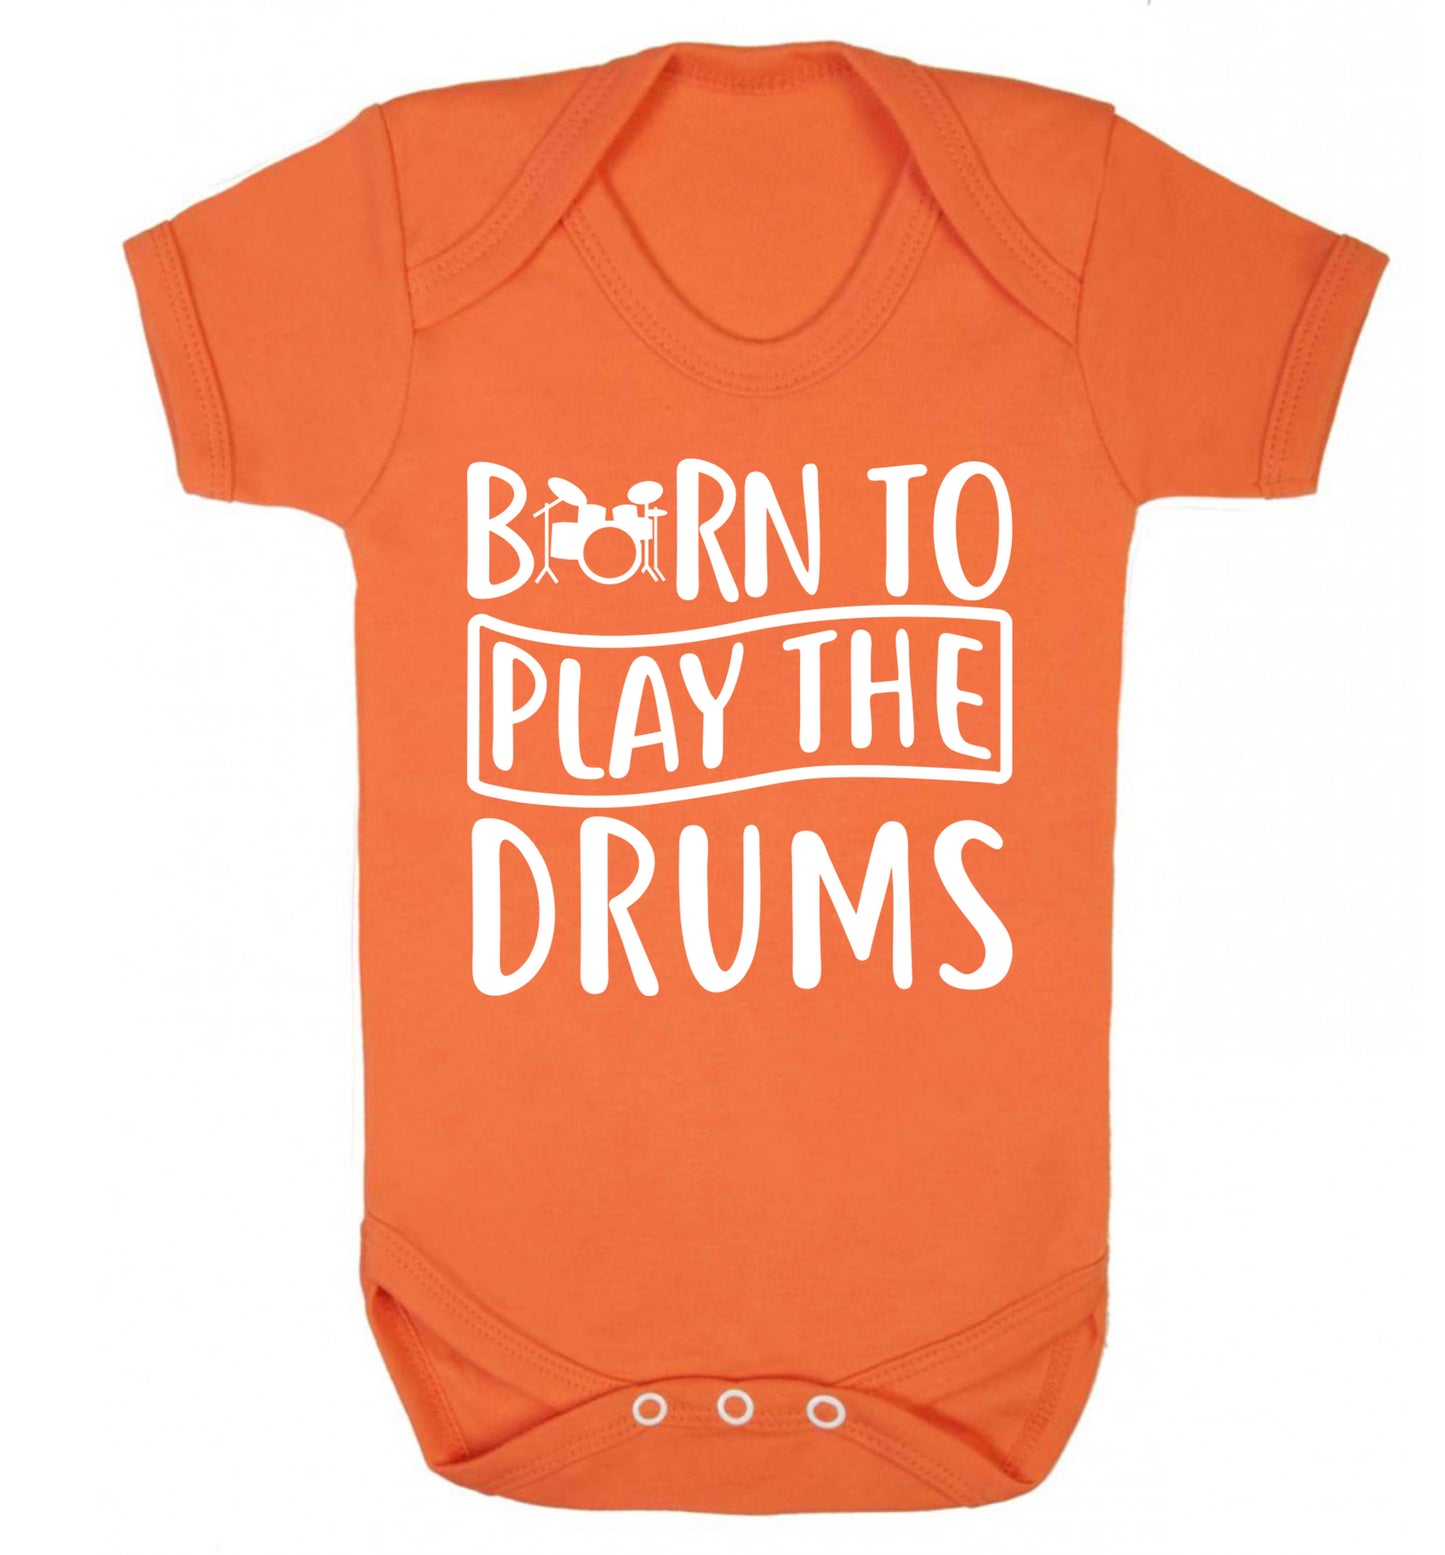 Born to play the drums Baby Vest orange 18-24 months